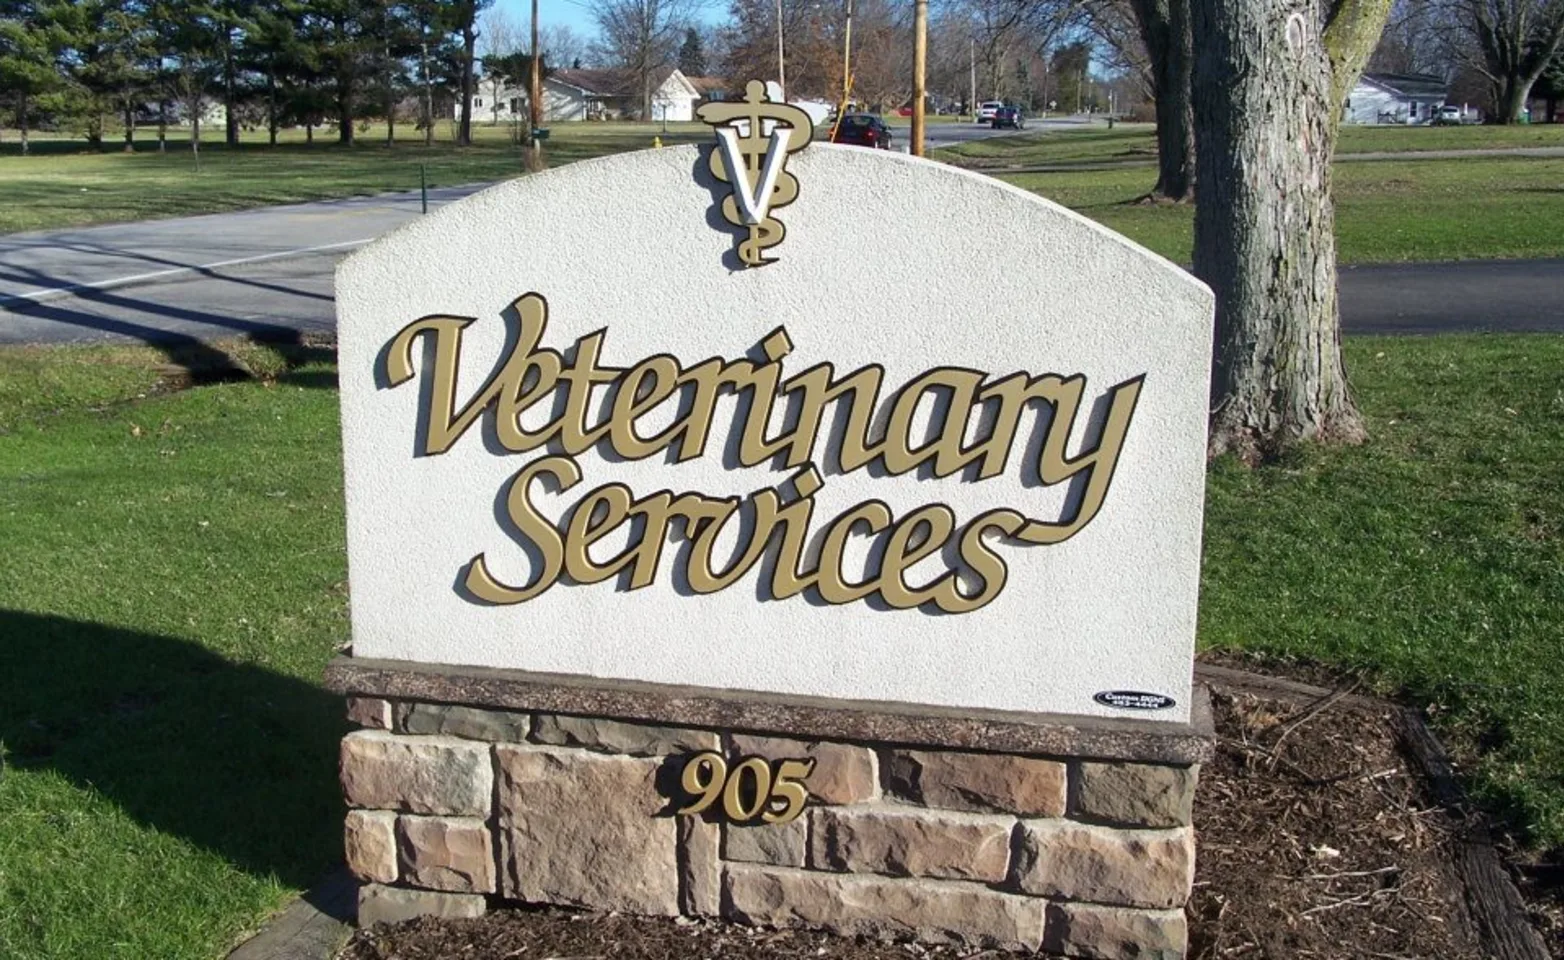  Veterinary Services outdoor sign